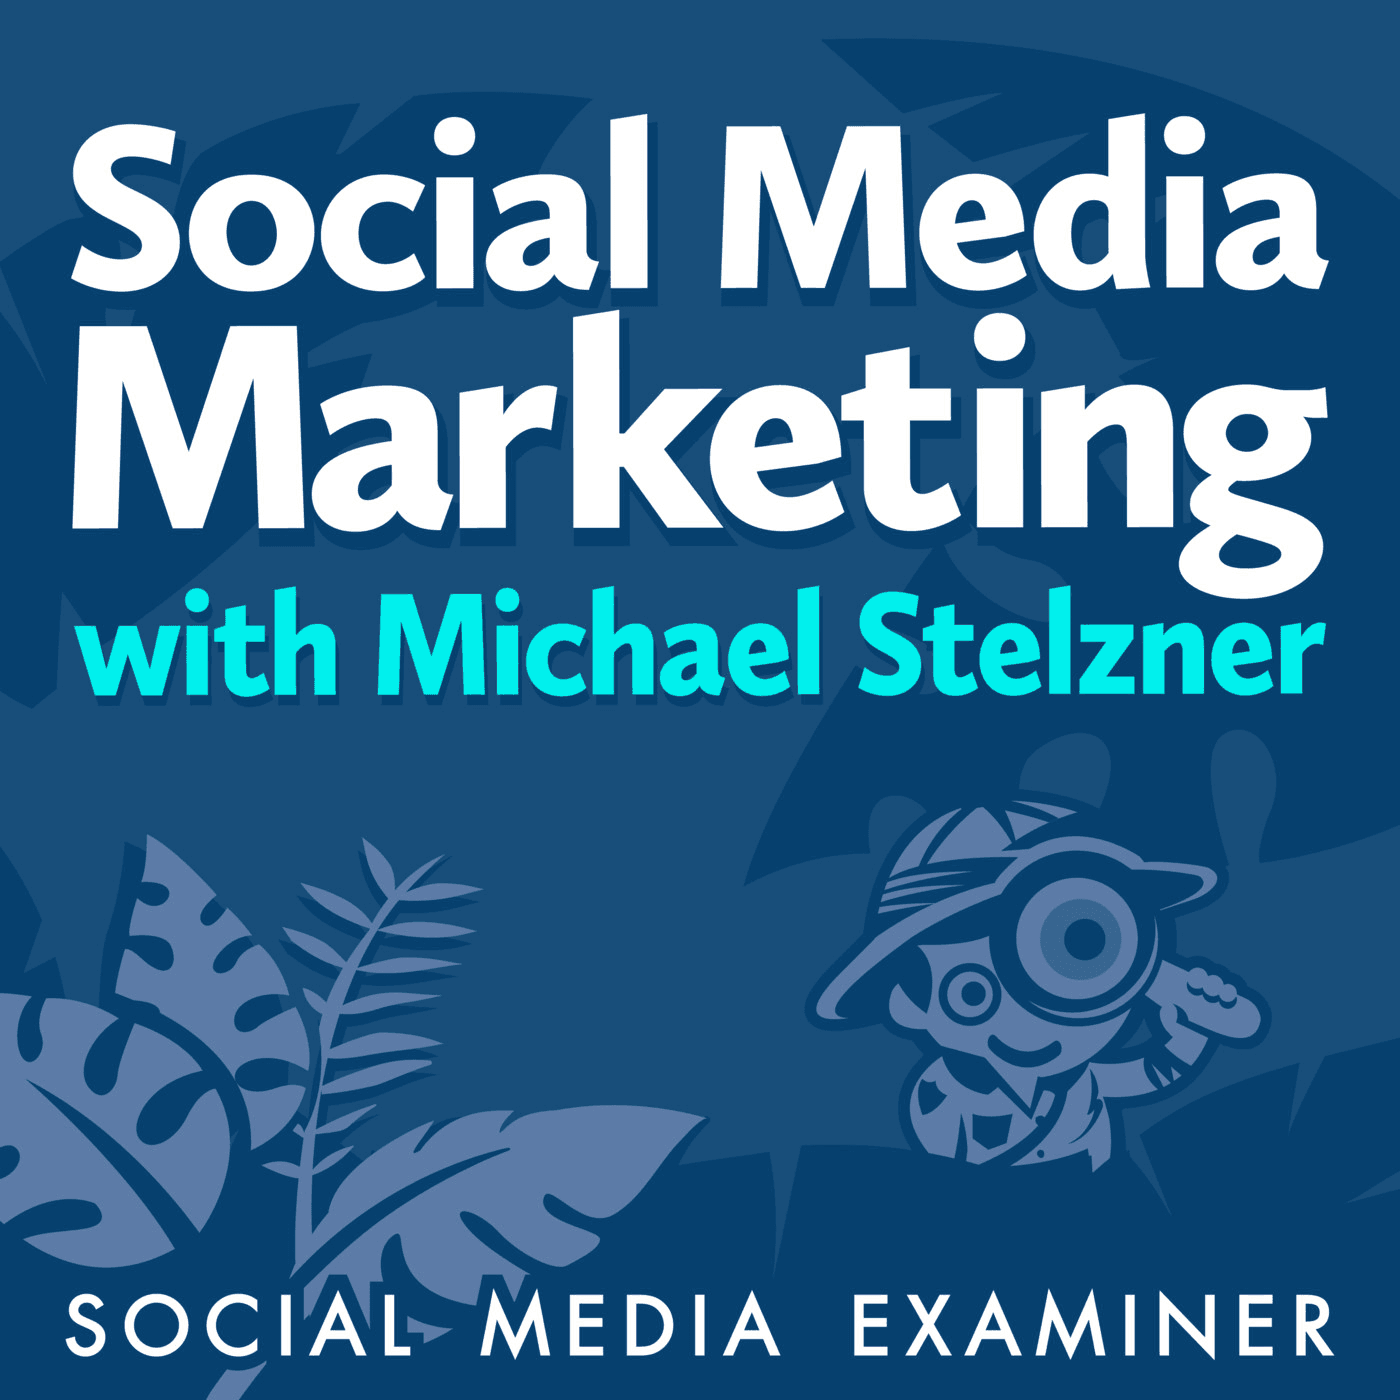 Podcast image for Social Media Marketing podcast with Michael Stelzner